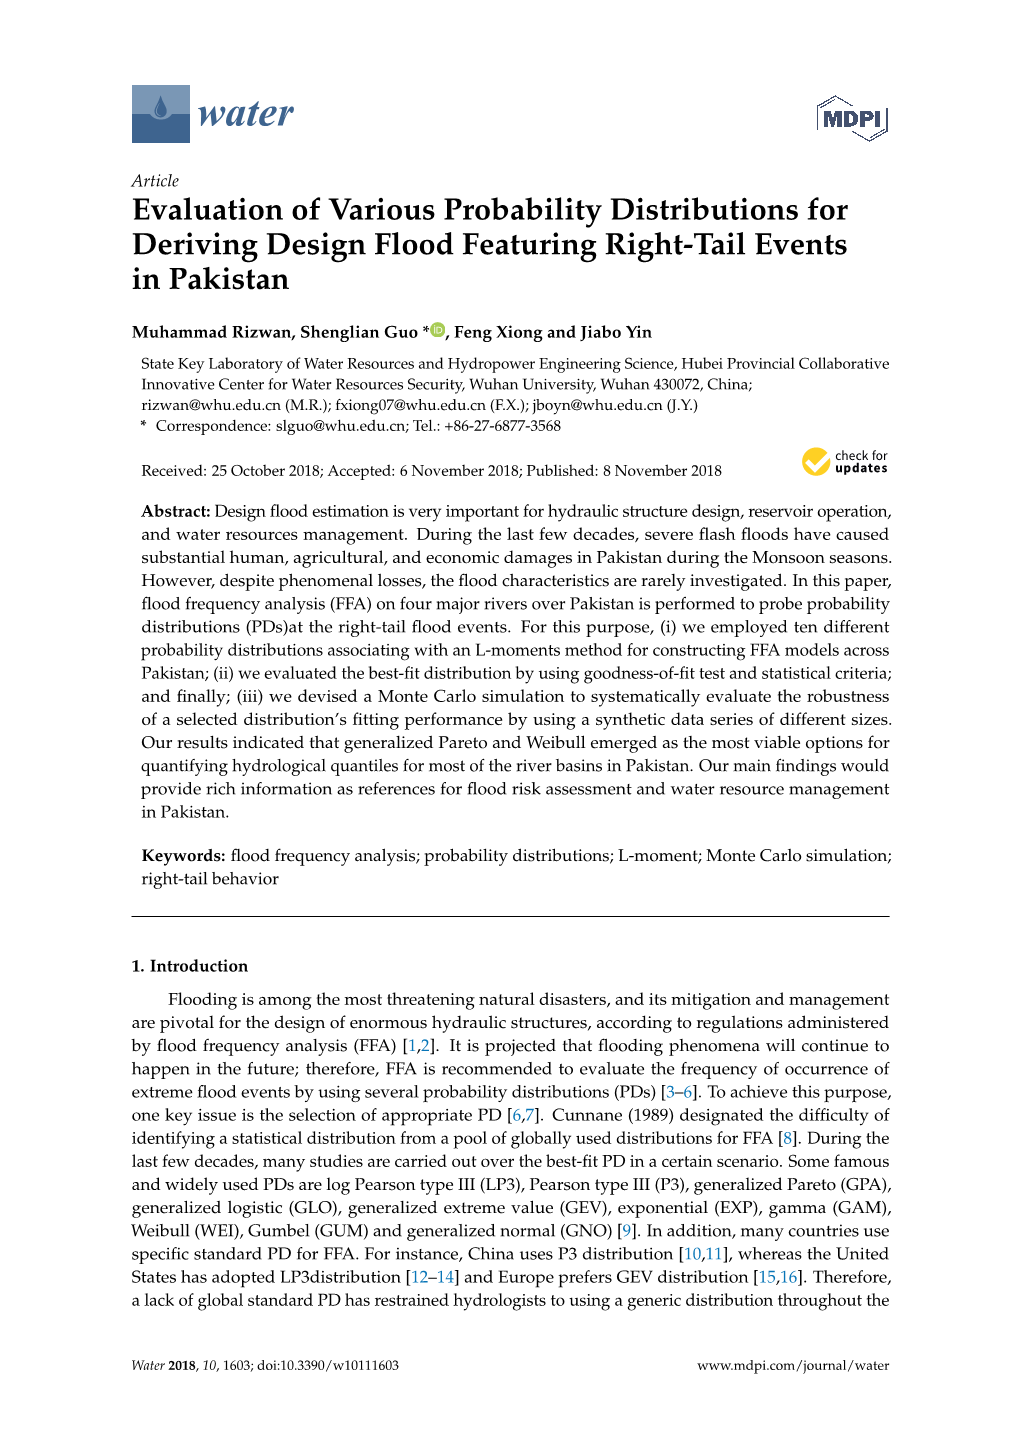 Evaluation of Various Probability Distributions for Deriving Design Flood Featuring Right-Tail Events in Pakistan